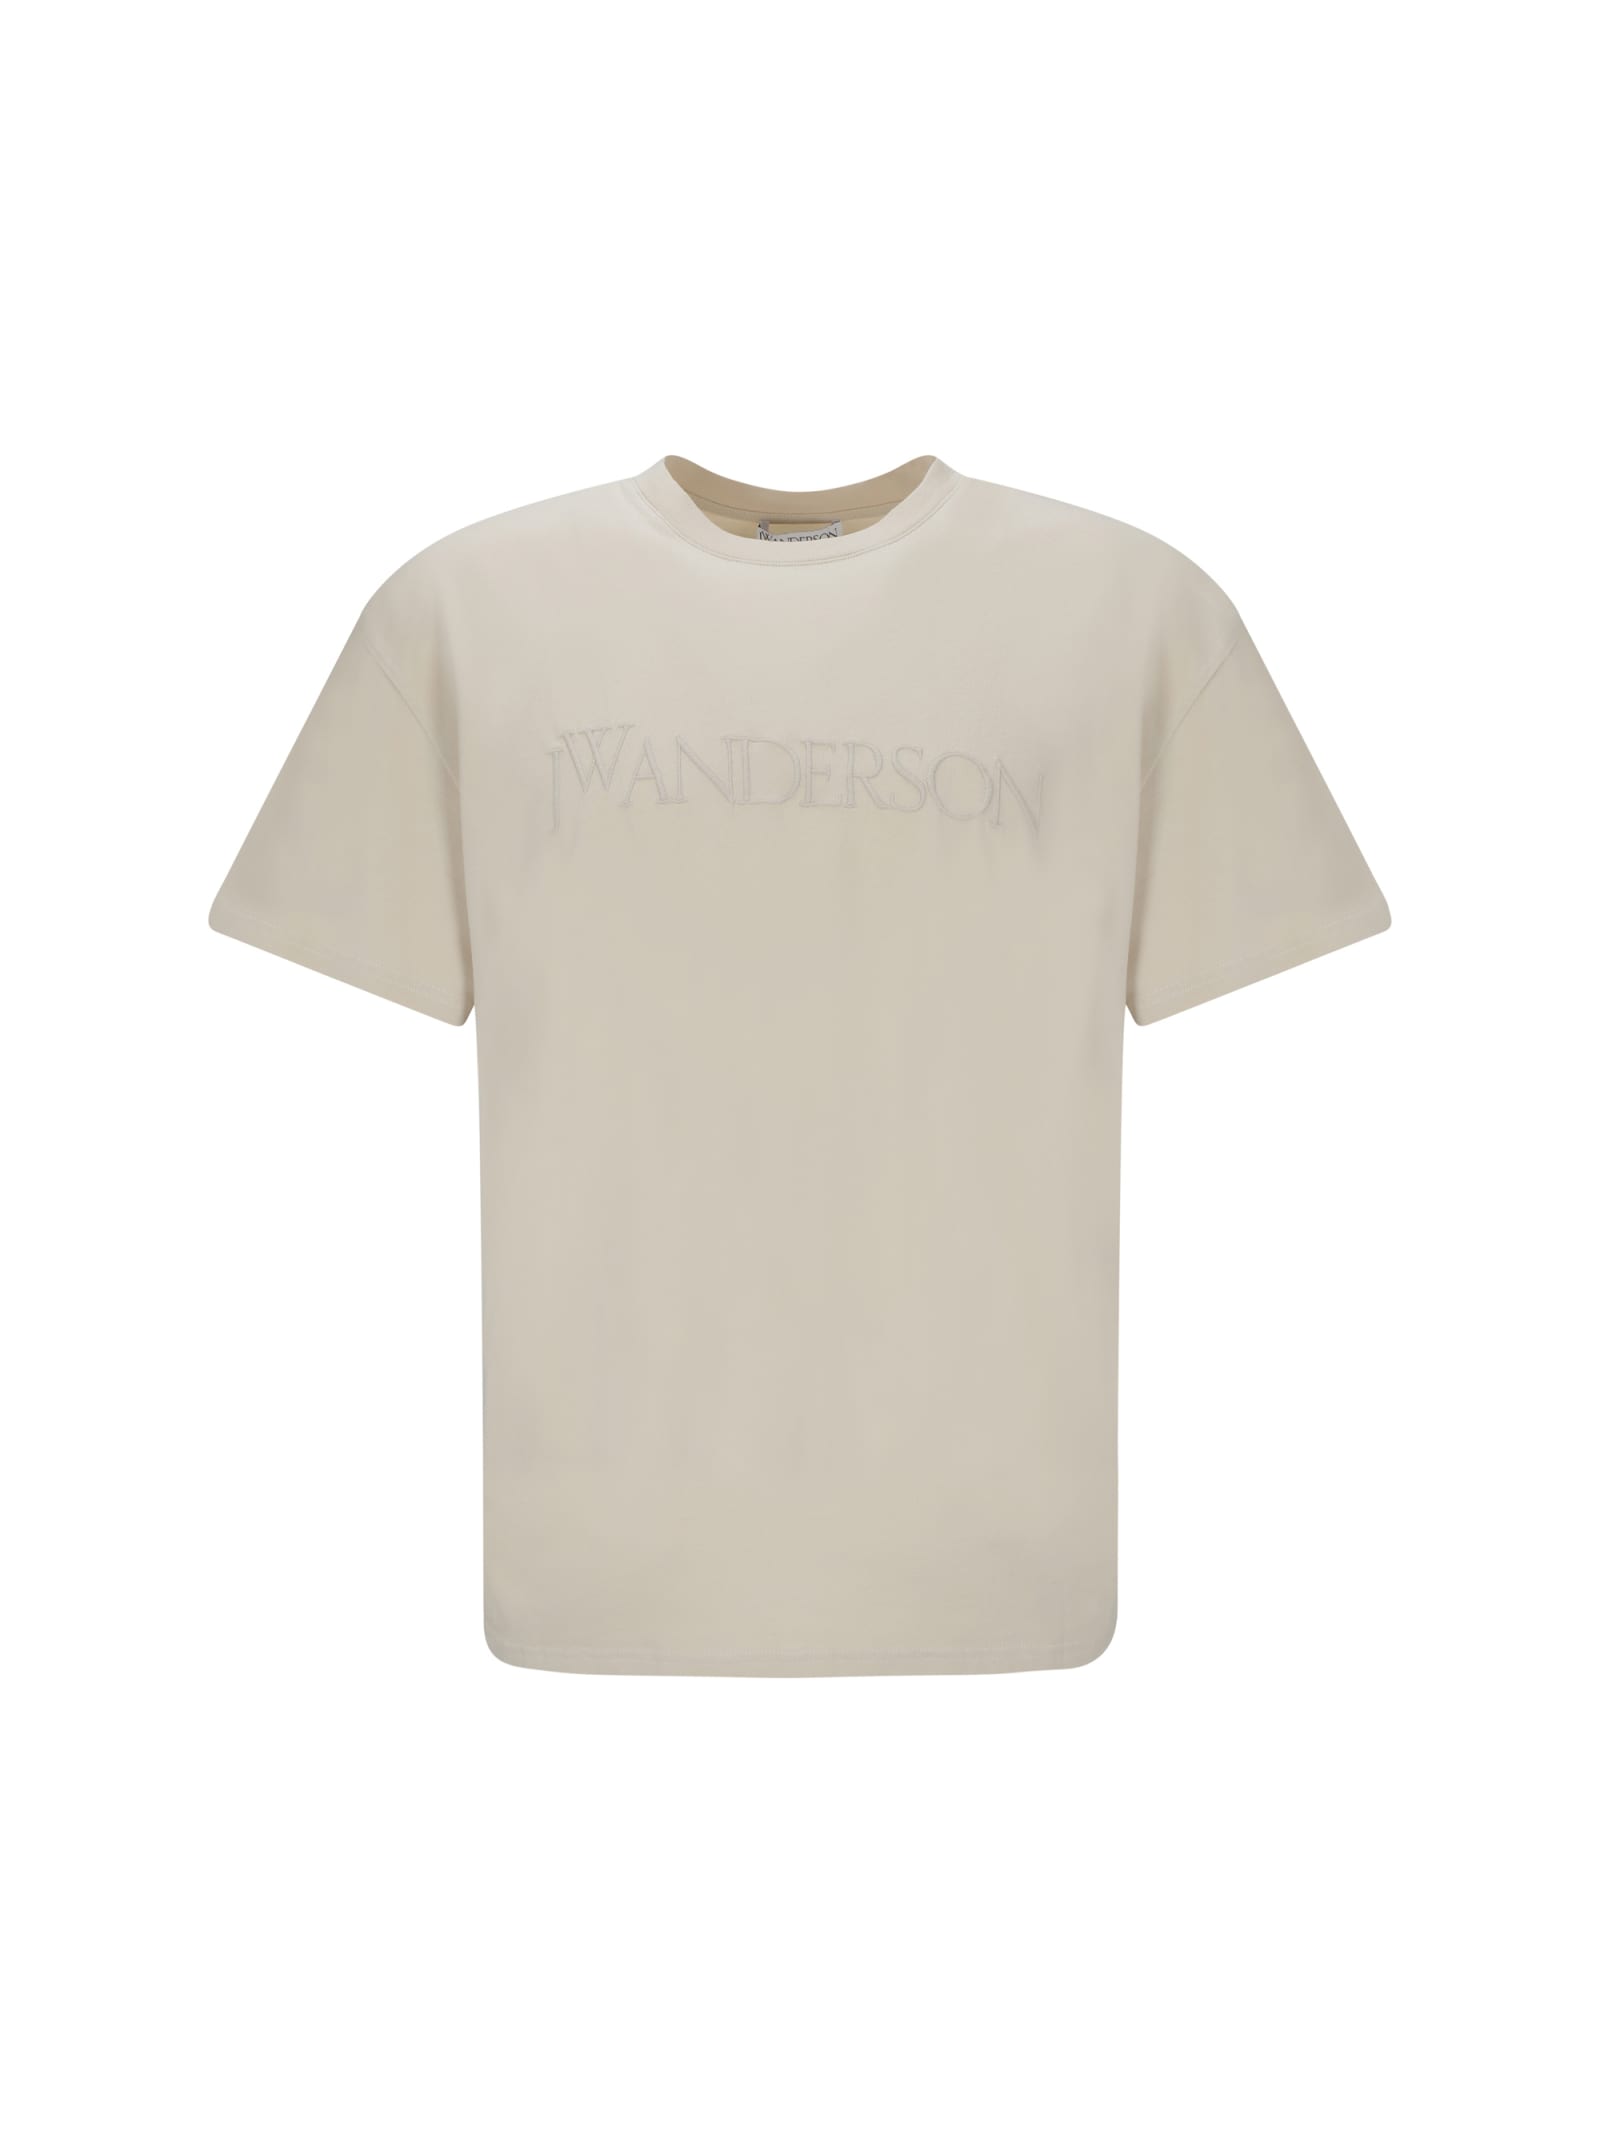 JW ANDERSON LOGO EMBROIDERY T-SHIRT